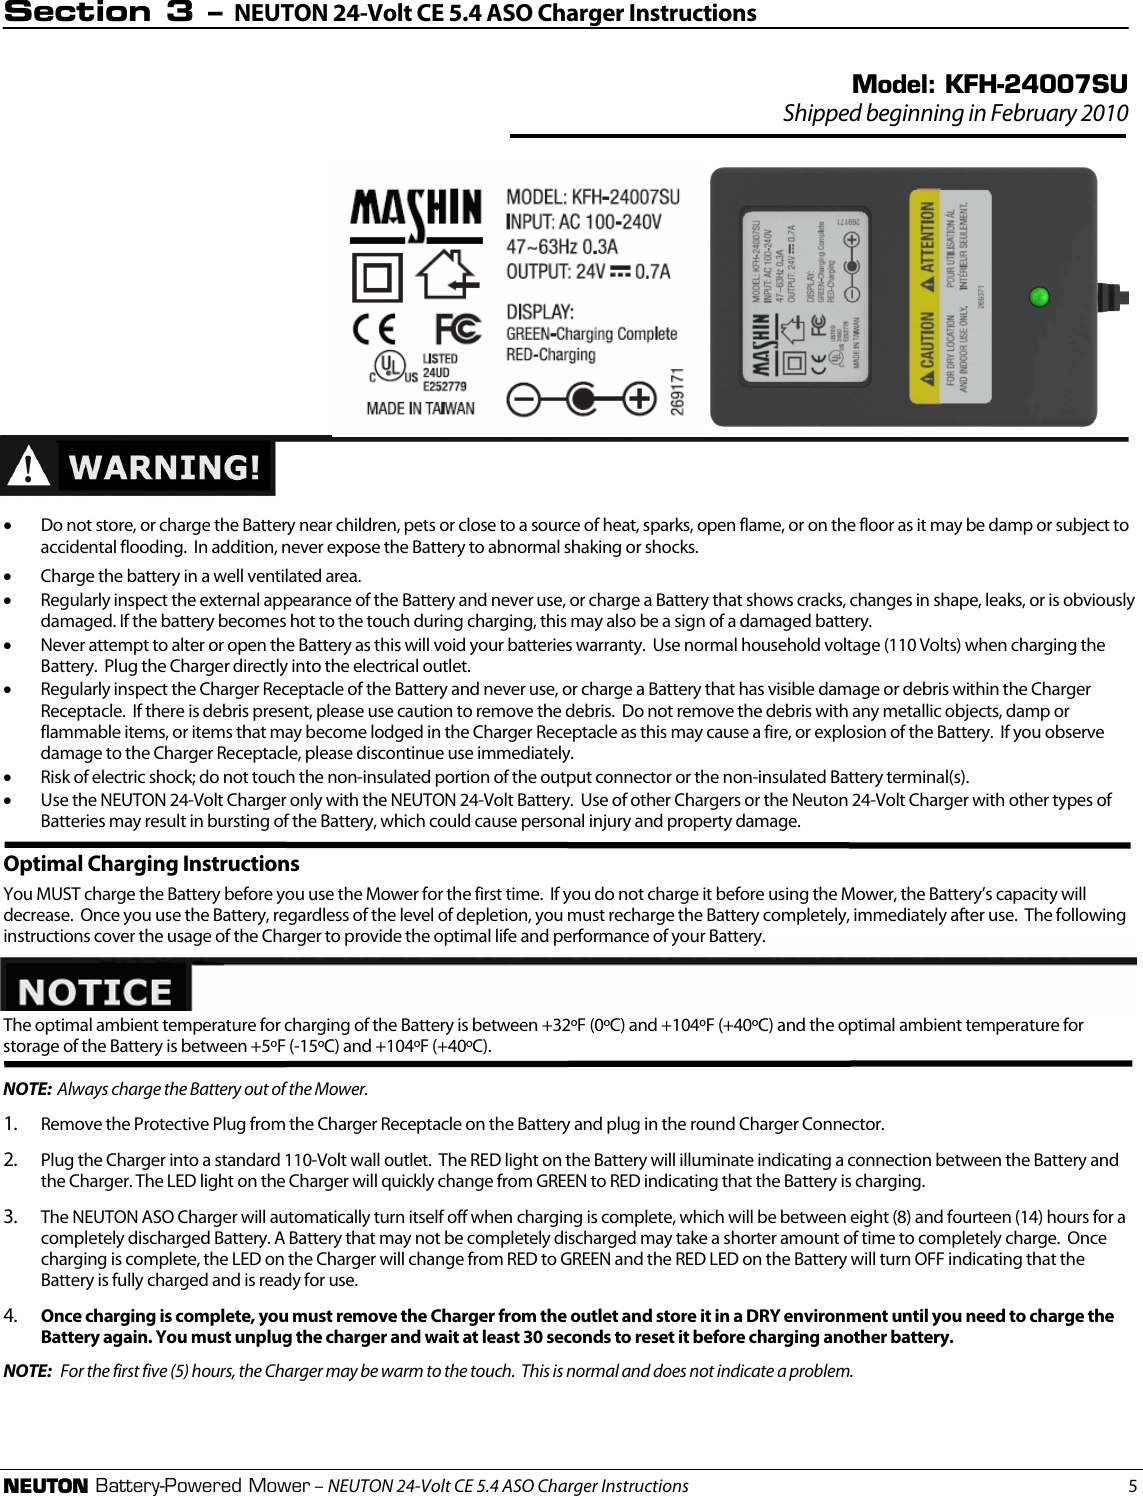 Page 5 of 8 - !! 272831 Neuton 24-Volt Charger Instructions Booklet